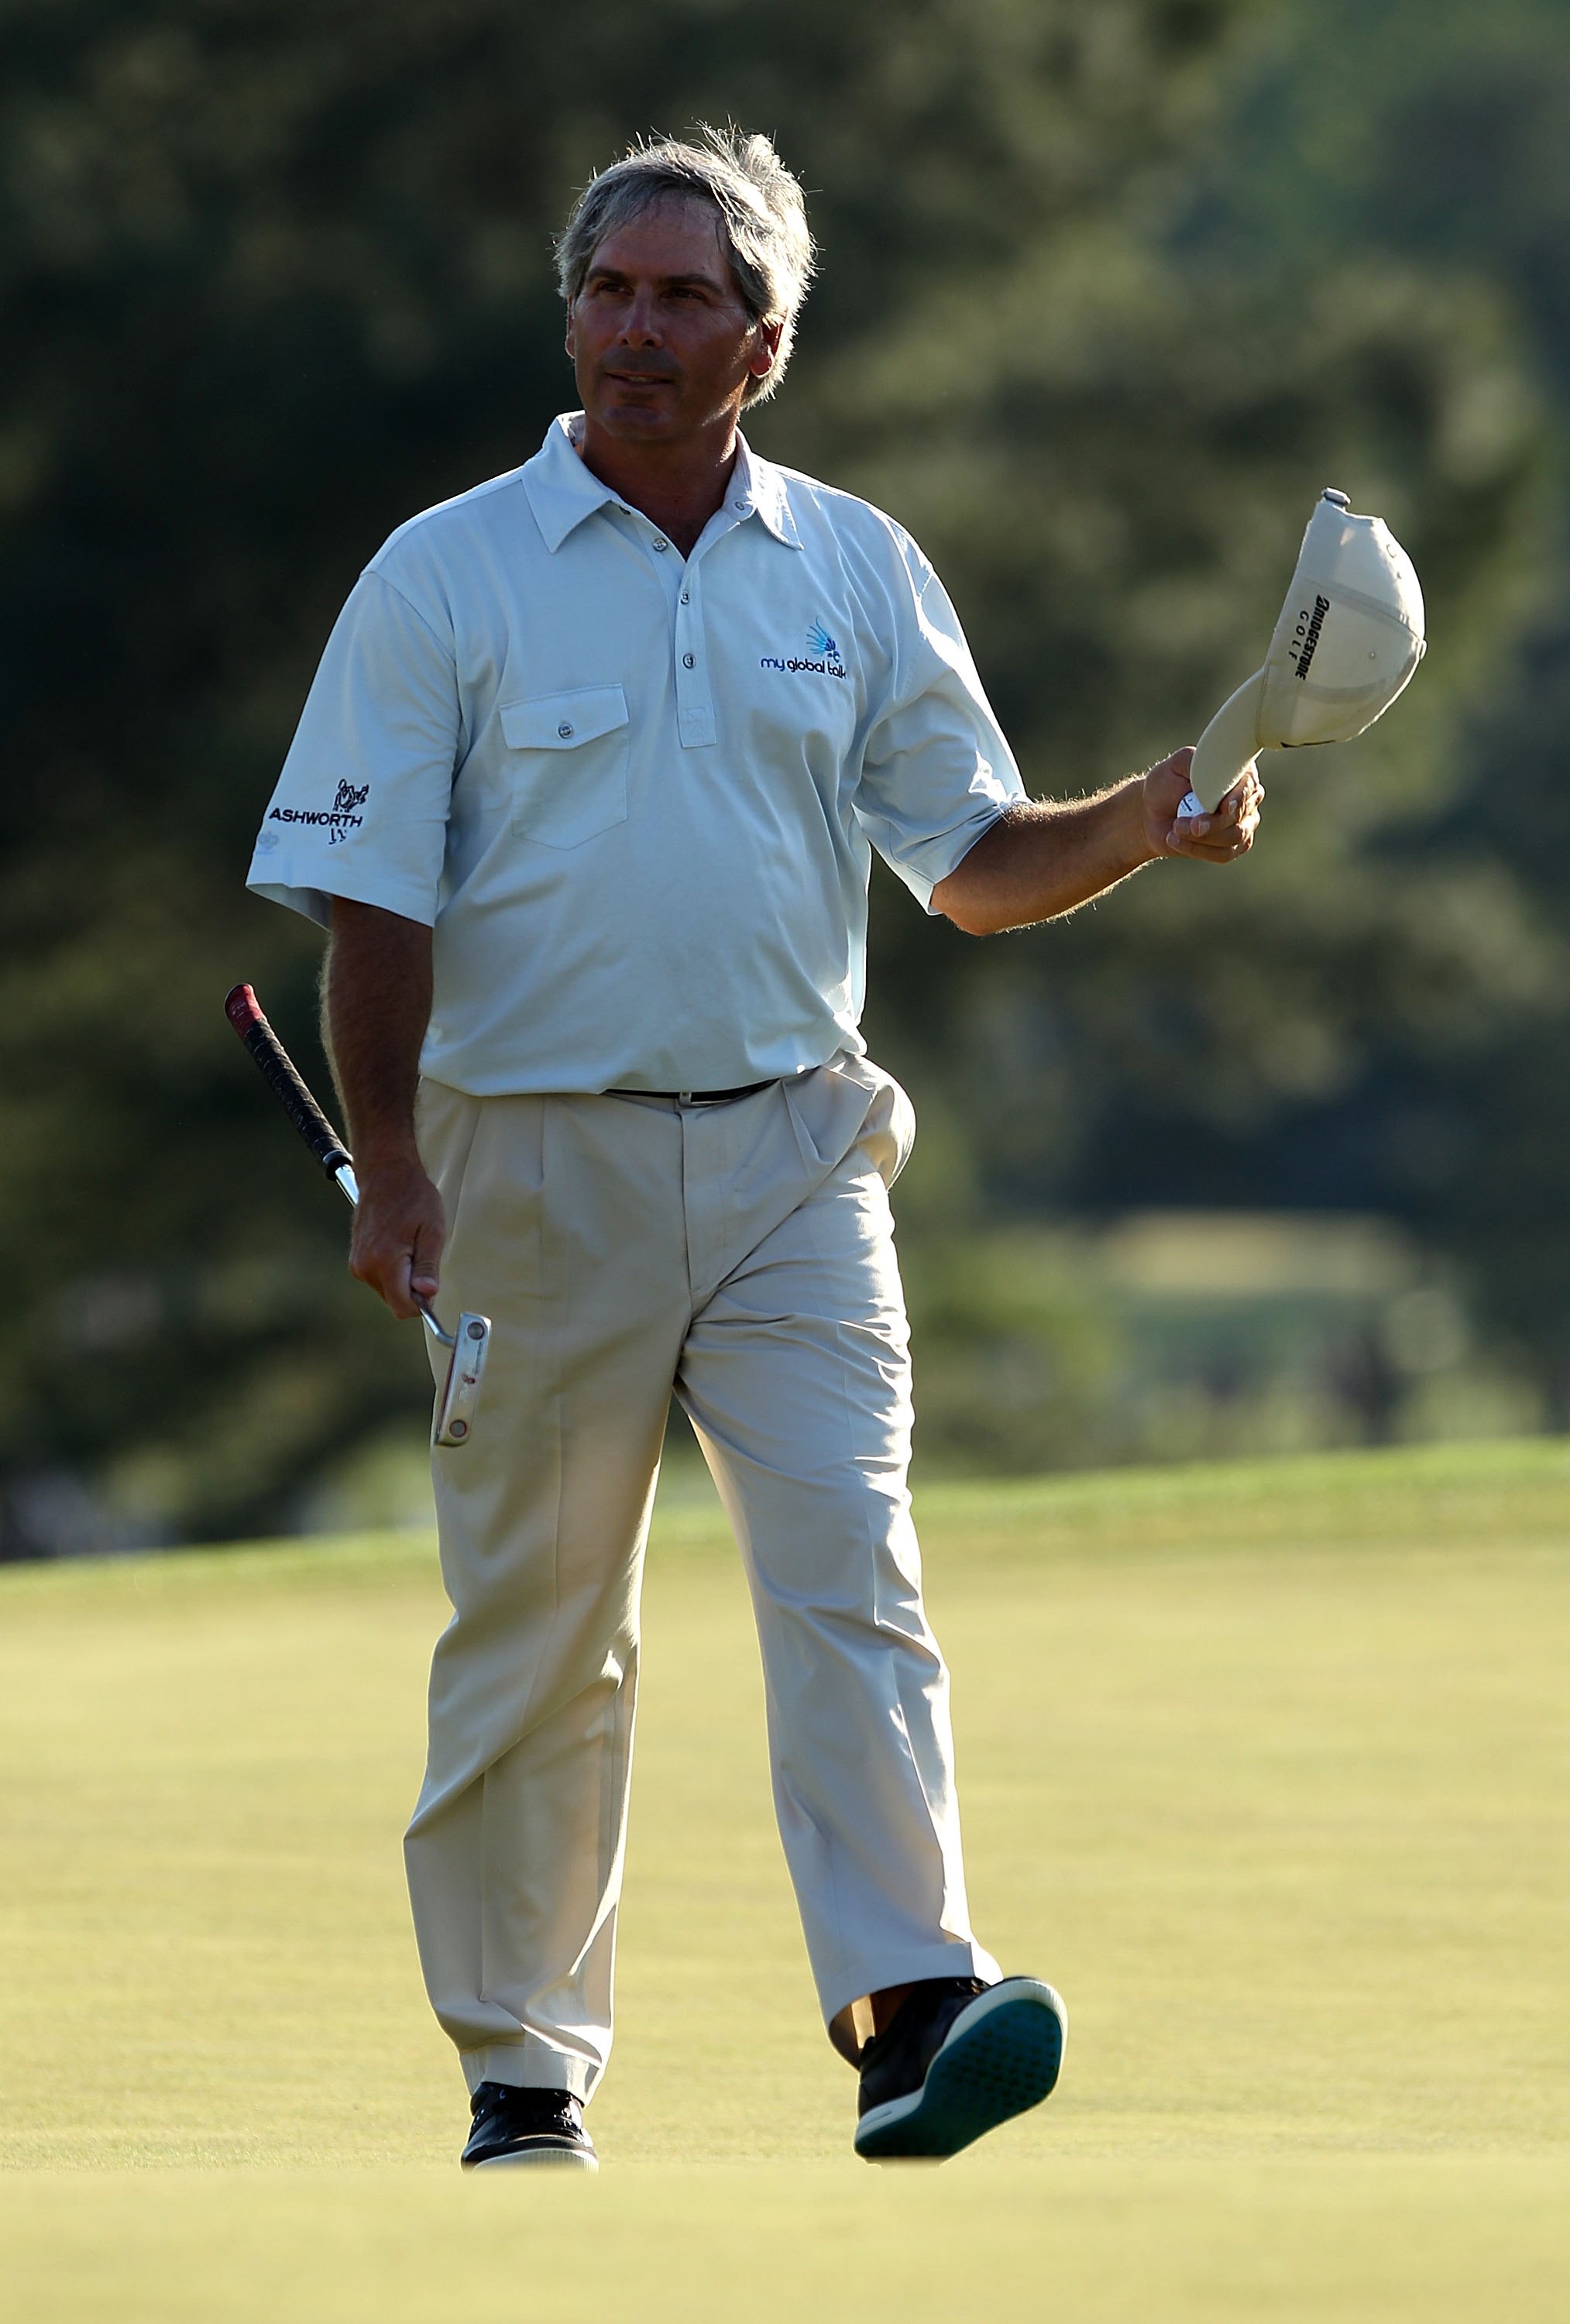 AUGUSTA, GA - APRIL 11:  Fred Couples during the final round of the 2010 Masters Tournament at Augusta National Golf Club on April 11, 2010 in Augusta, Georgia.  (Photo by Streeter Lecka/Getty Images for Golf Week)